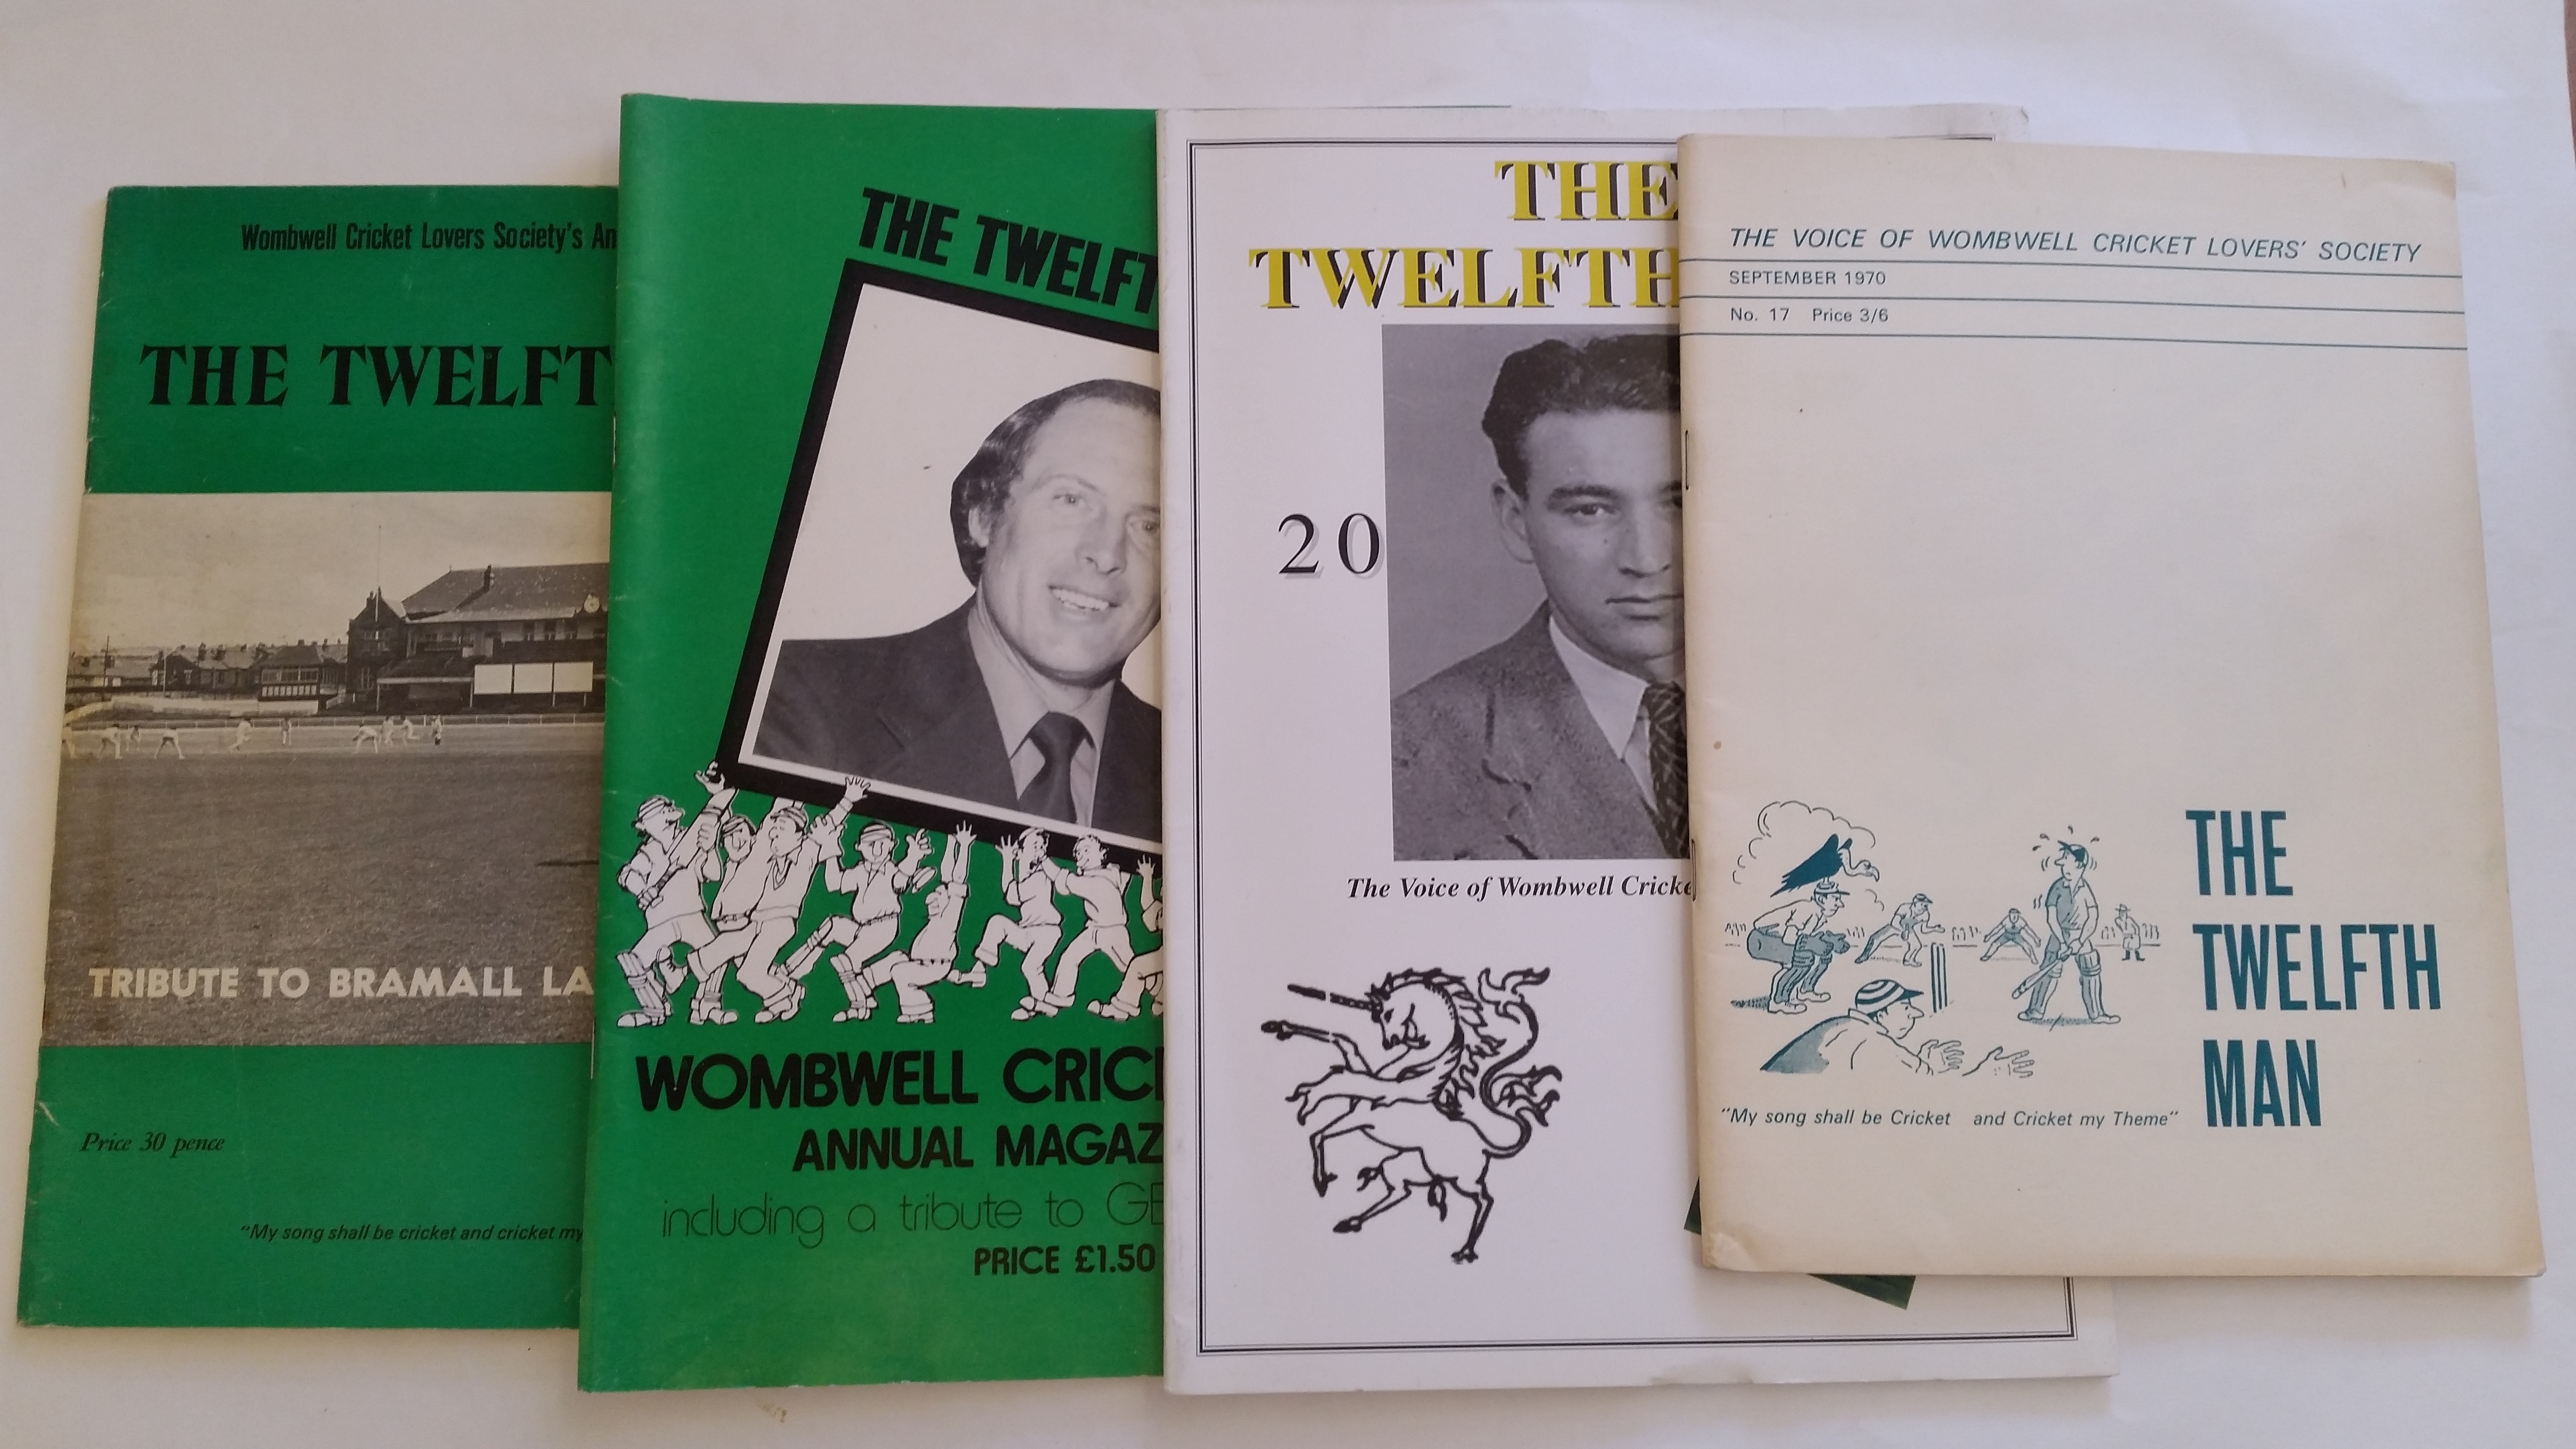 CRICKET, magazines, The Twelfth Man The Voice of Wombwell Cricket Lovers Society, 1970, 1973,